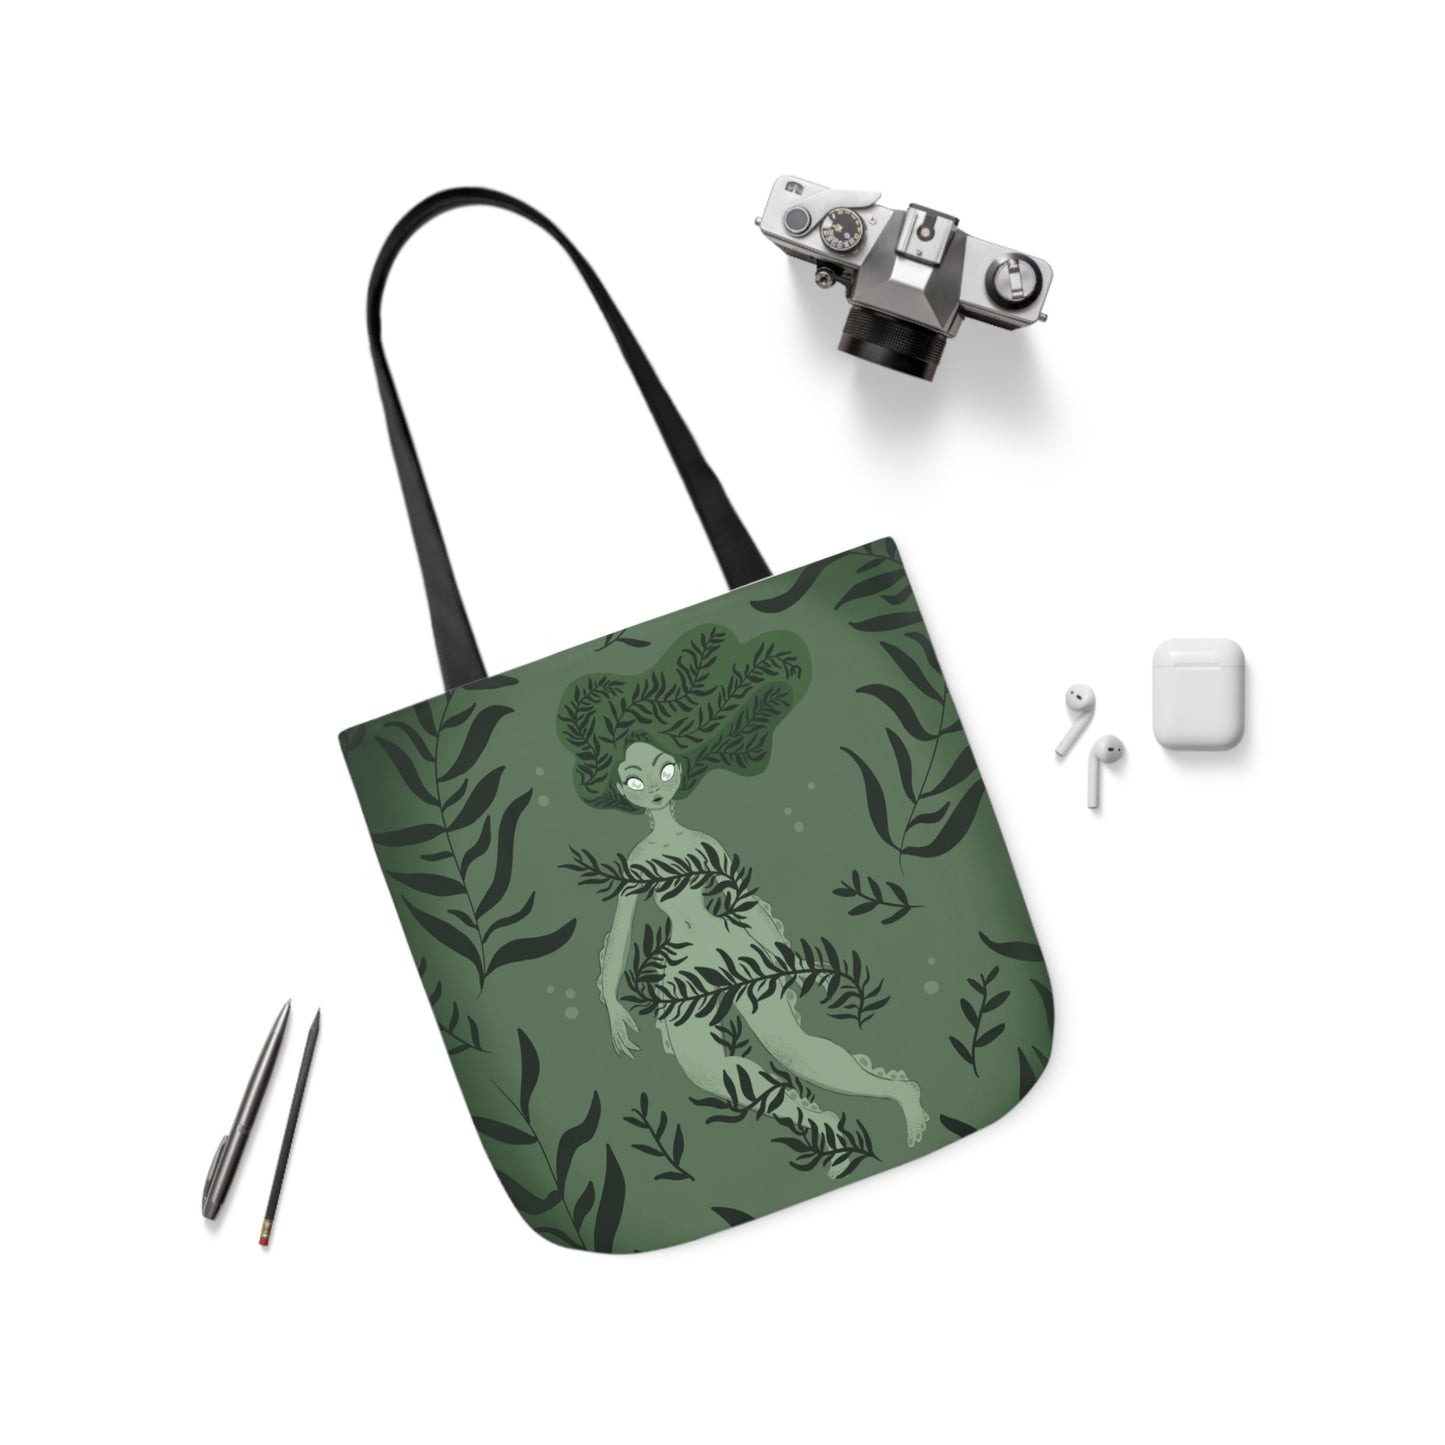 She Creature Tote Bag / "Out of Your League" Tote Bag / Halloween Tote Bags